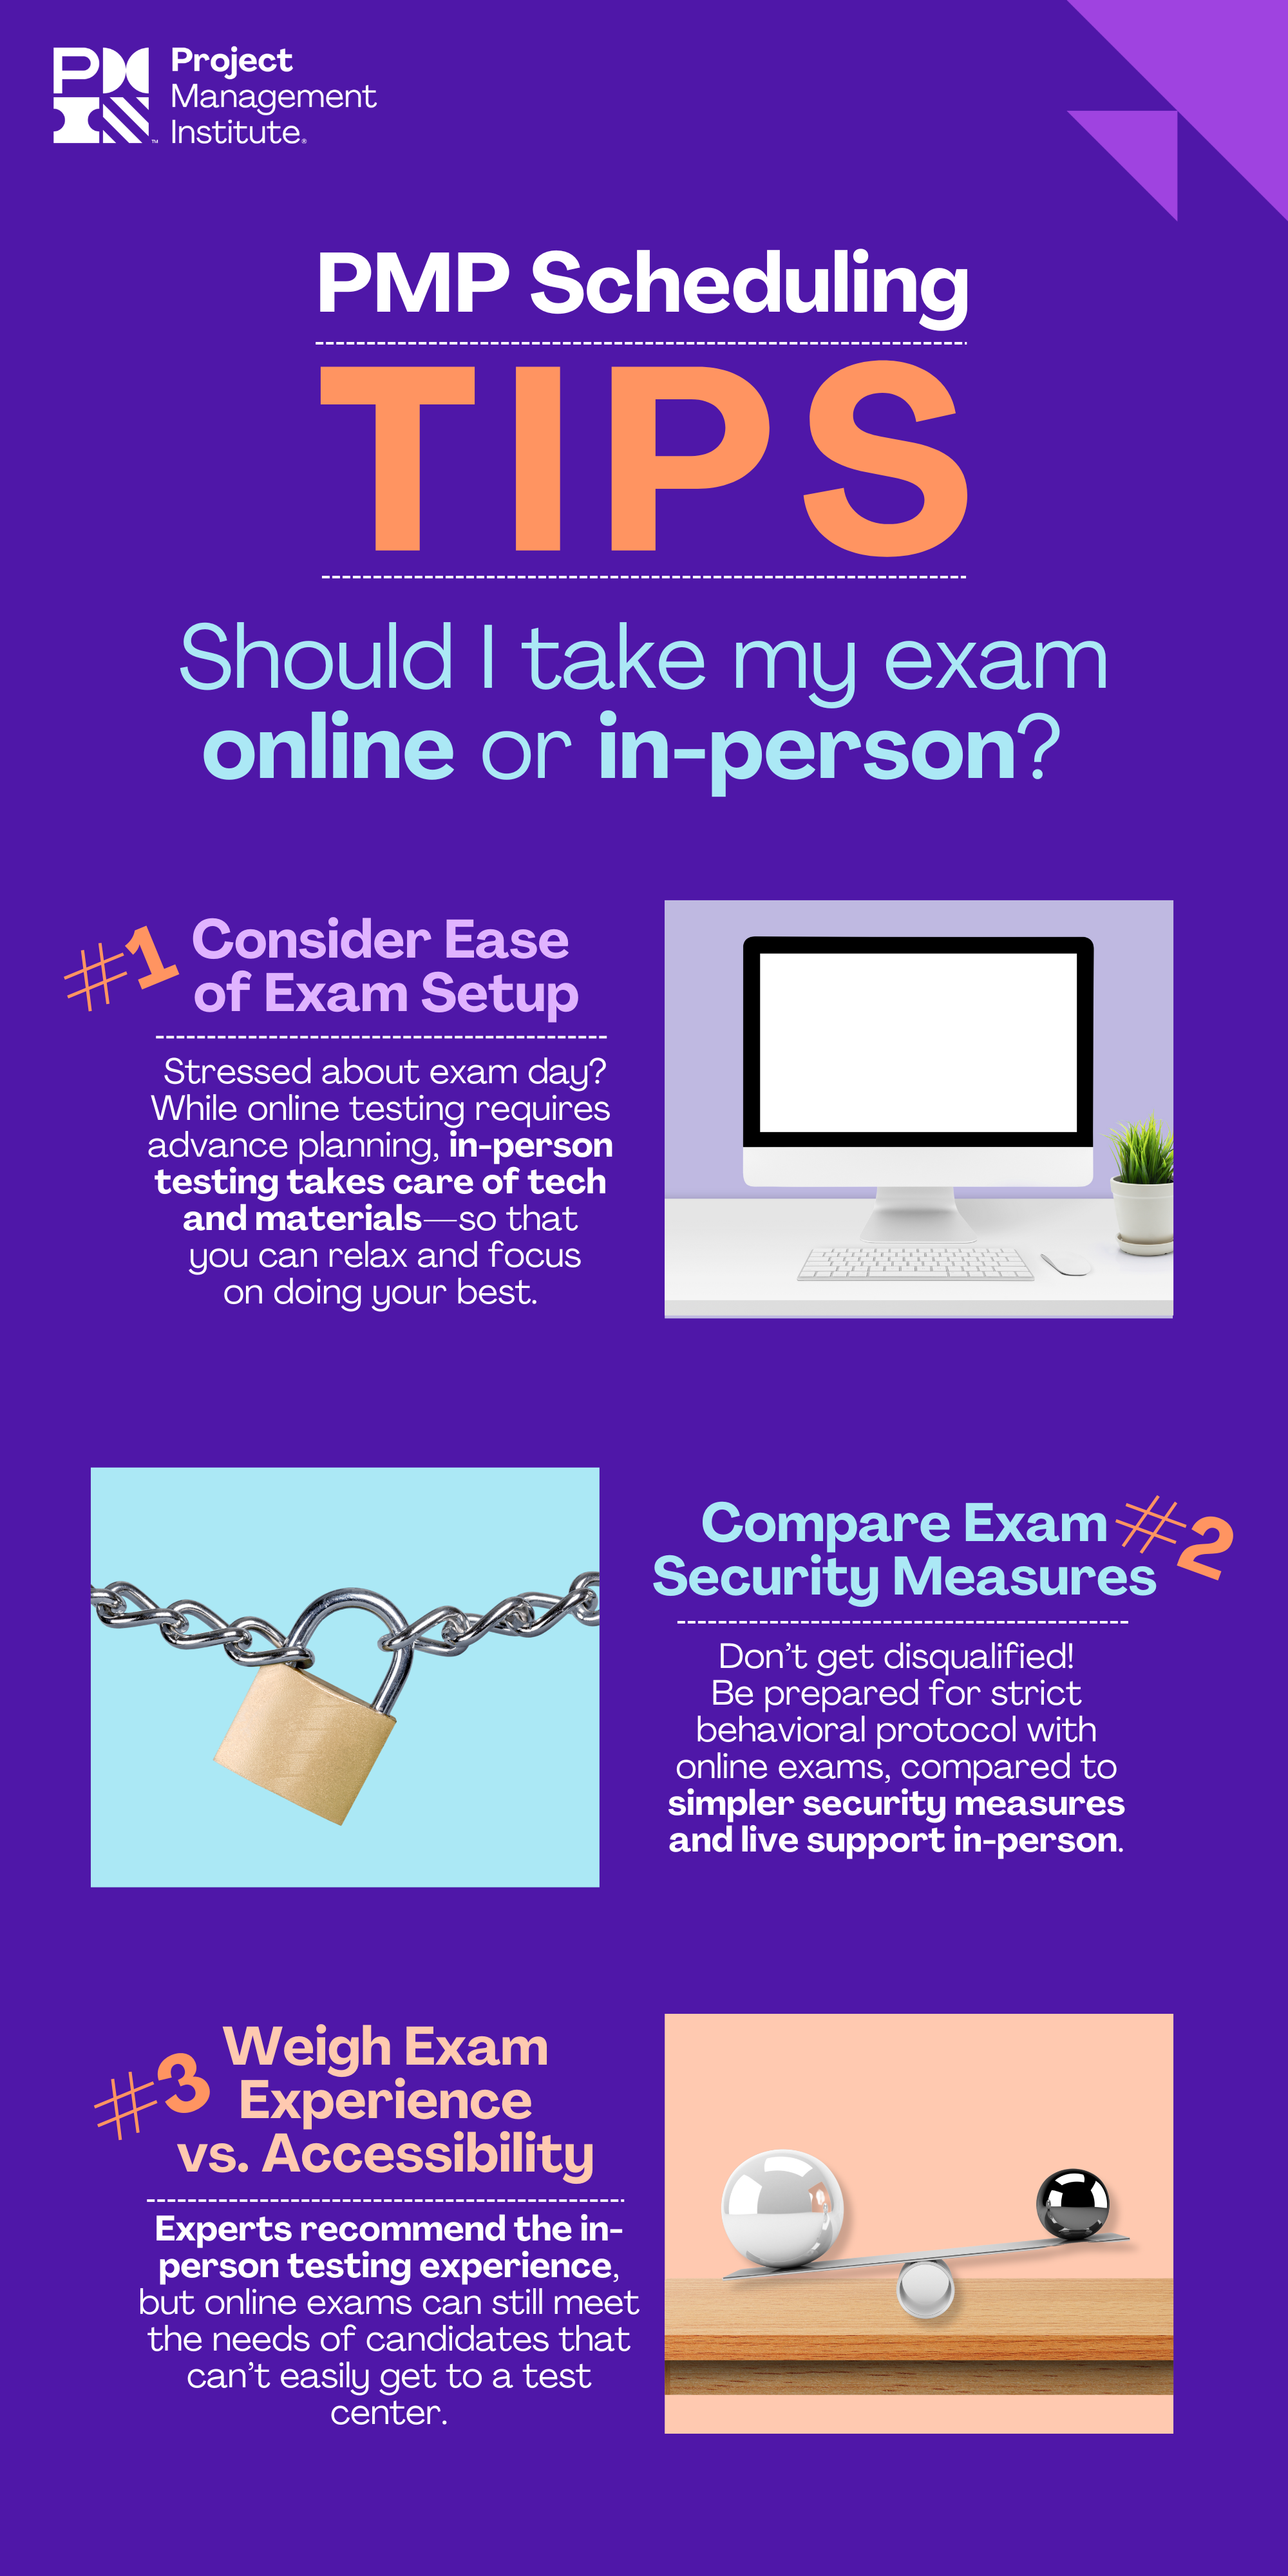 Infographic that breaks down online and in-person testing considerations when taking the PMP exam